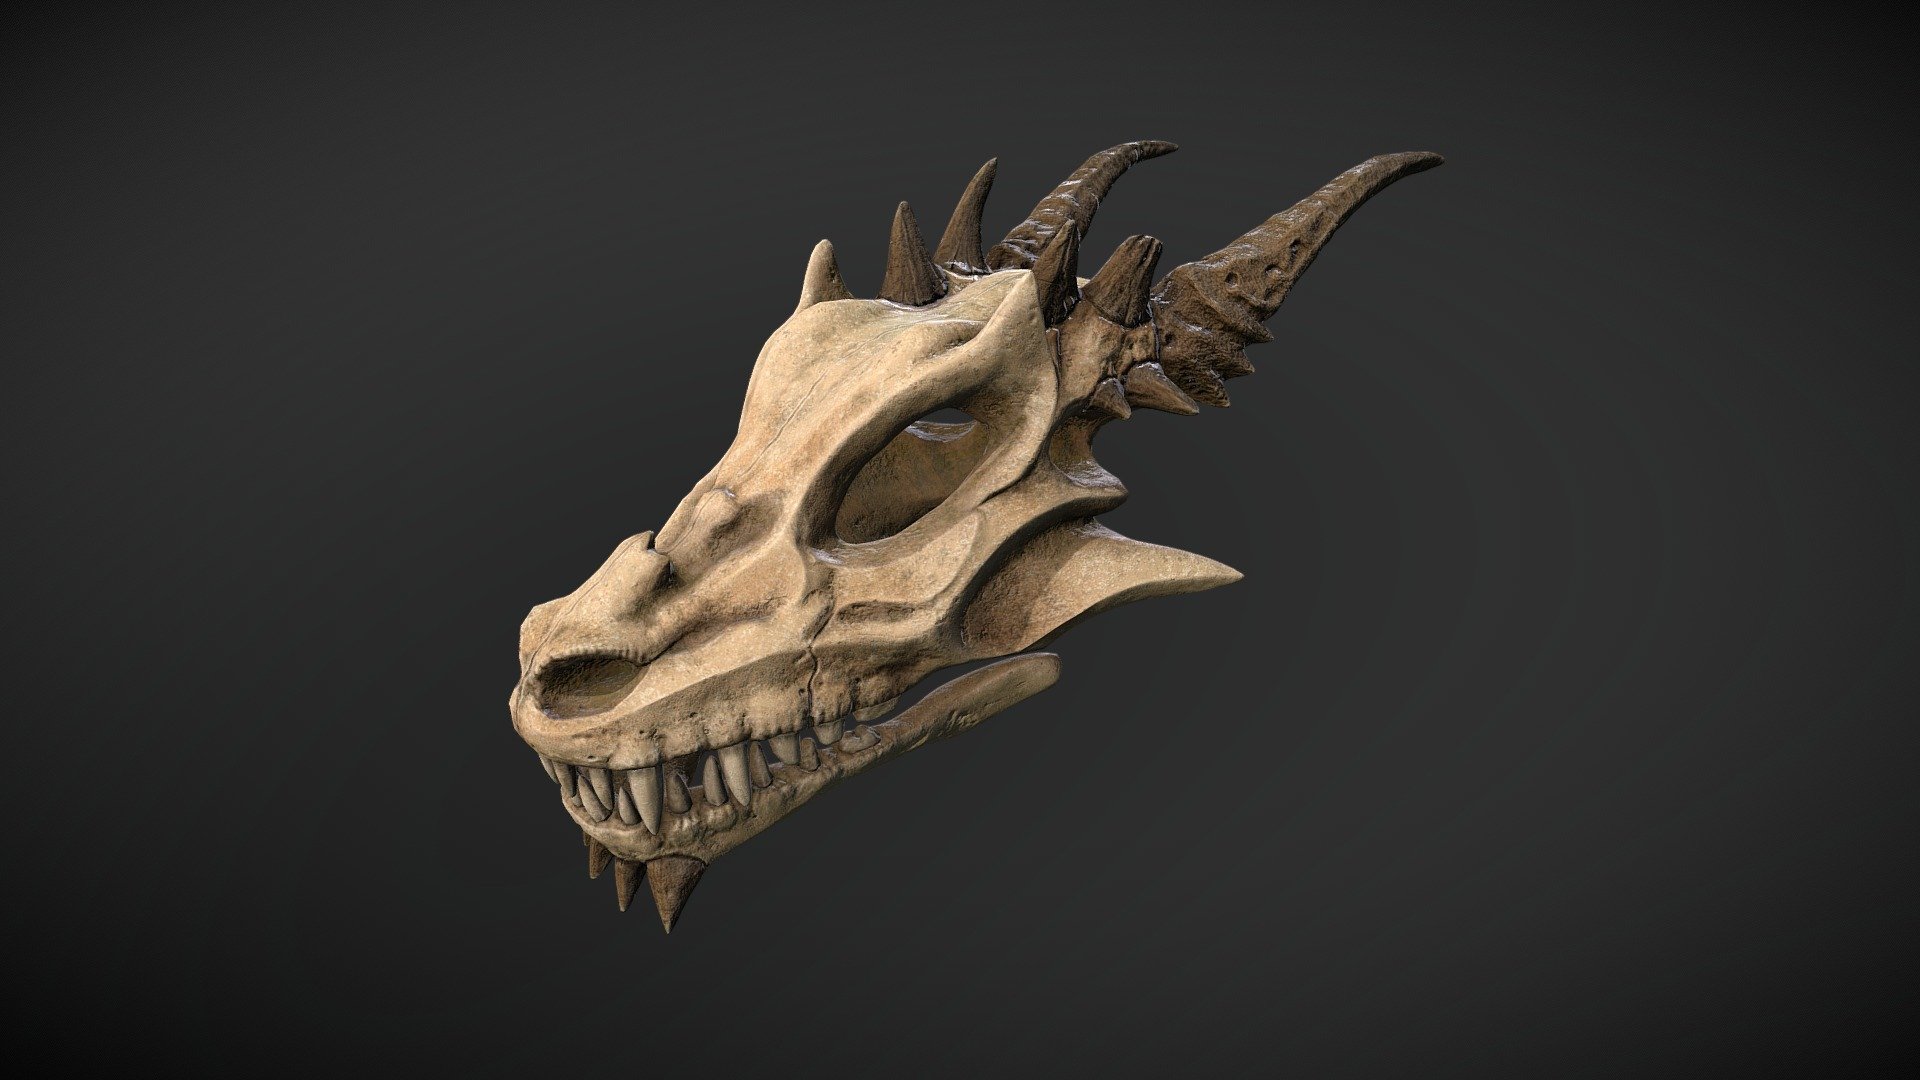 This is a model of a dragon skull. Modeled in 3ds Max, 2k texture maps, optimized topology and uv unwrapped.

Clean geometry;
Fully UV textured;
All objects, materials, textures named correctly;
Scene is organized;
Model has a real-world scale, all materials are included in max scene. File units are meters.

Object count: 4
Materials count: 1
Vertex count: 13530
Polygons count: 13775
Tris count: 26952

1 PBR set of textures:

Albedo 20482048 (png)
Normal 20482048 (png)
Roughness 20482048 (png)
Ambient occlusion 20482048 (png)
Metallic 20482048 (png)

This is a game-ready model 3d model